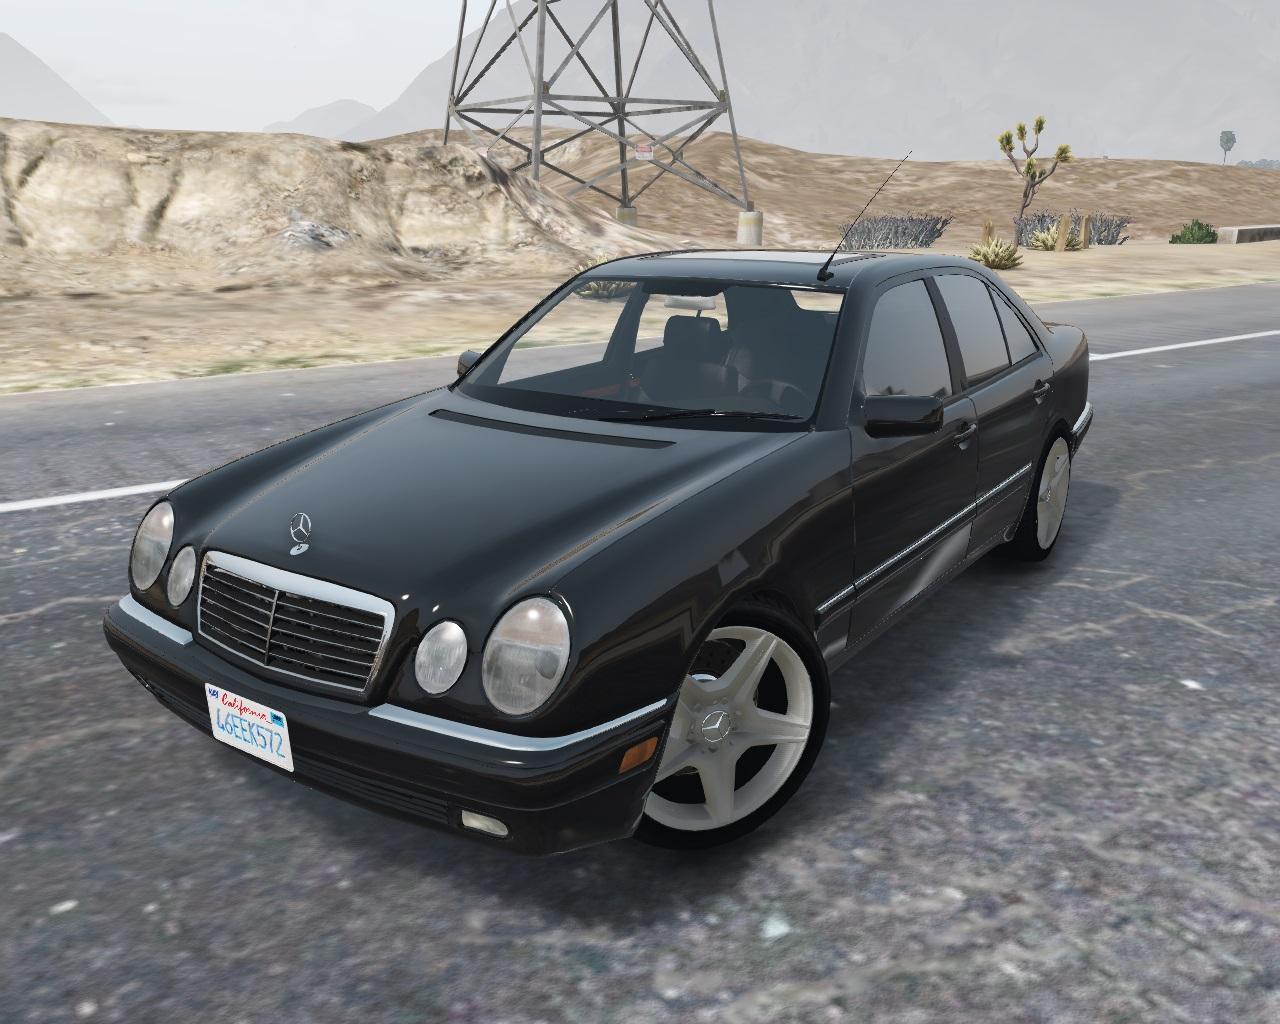 Mercedes-Benz E420 w210 (updated) (Add-On/Replace)